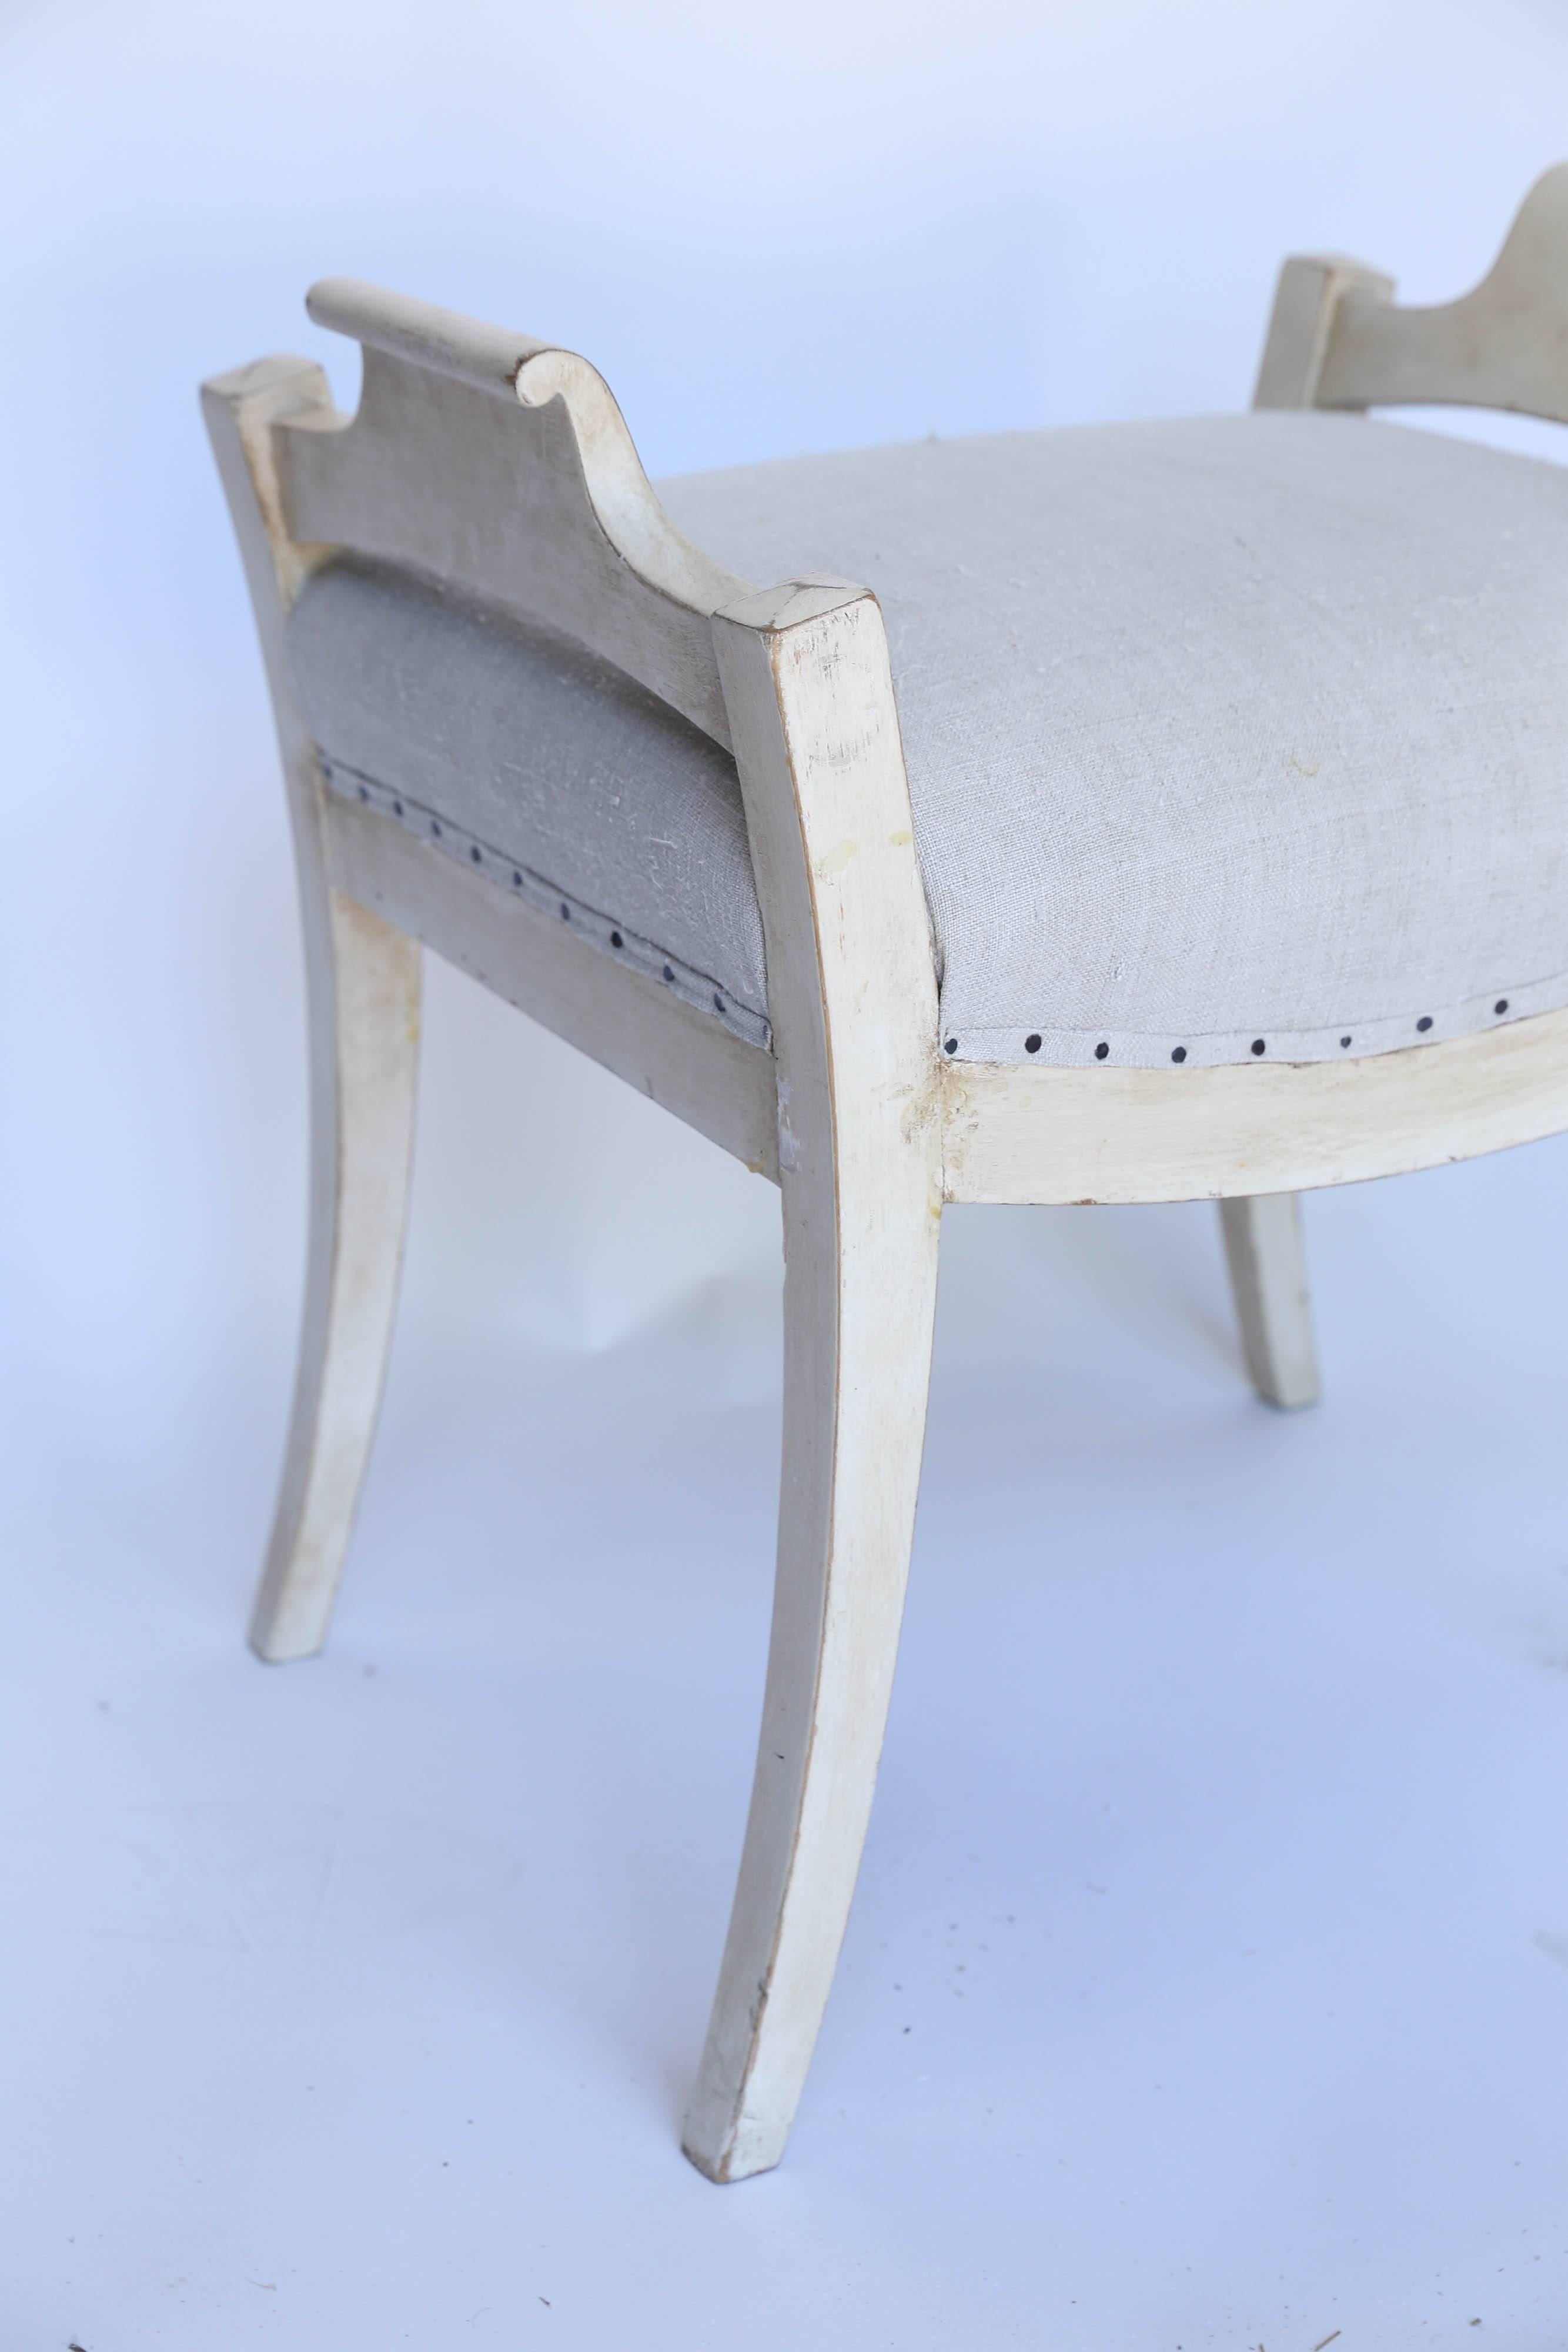 A charming pair of Gustavian style benches found in France. Newly upholstered in off-white linen with exposed upholstery tacks, these beautifully proportioned benches have gently worn off-white paint. Solid, sturdy and eye-catching.